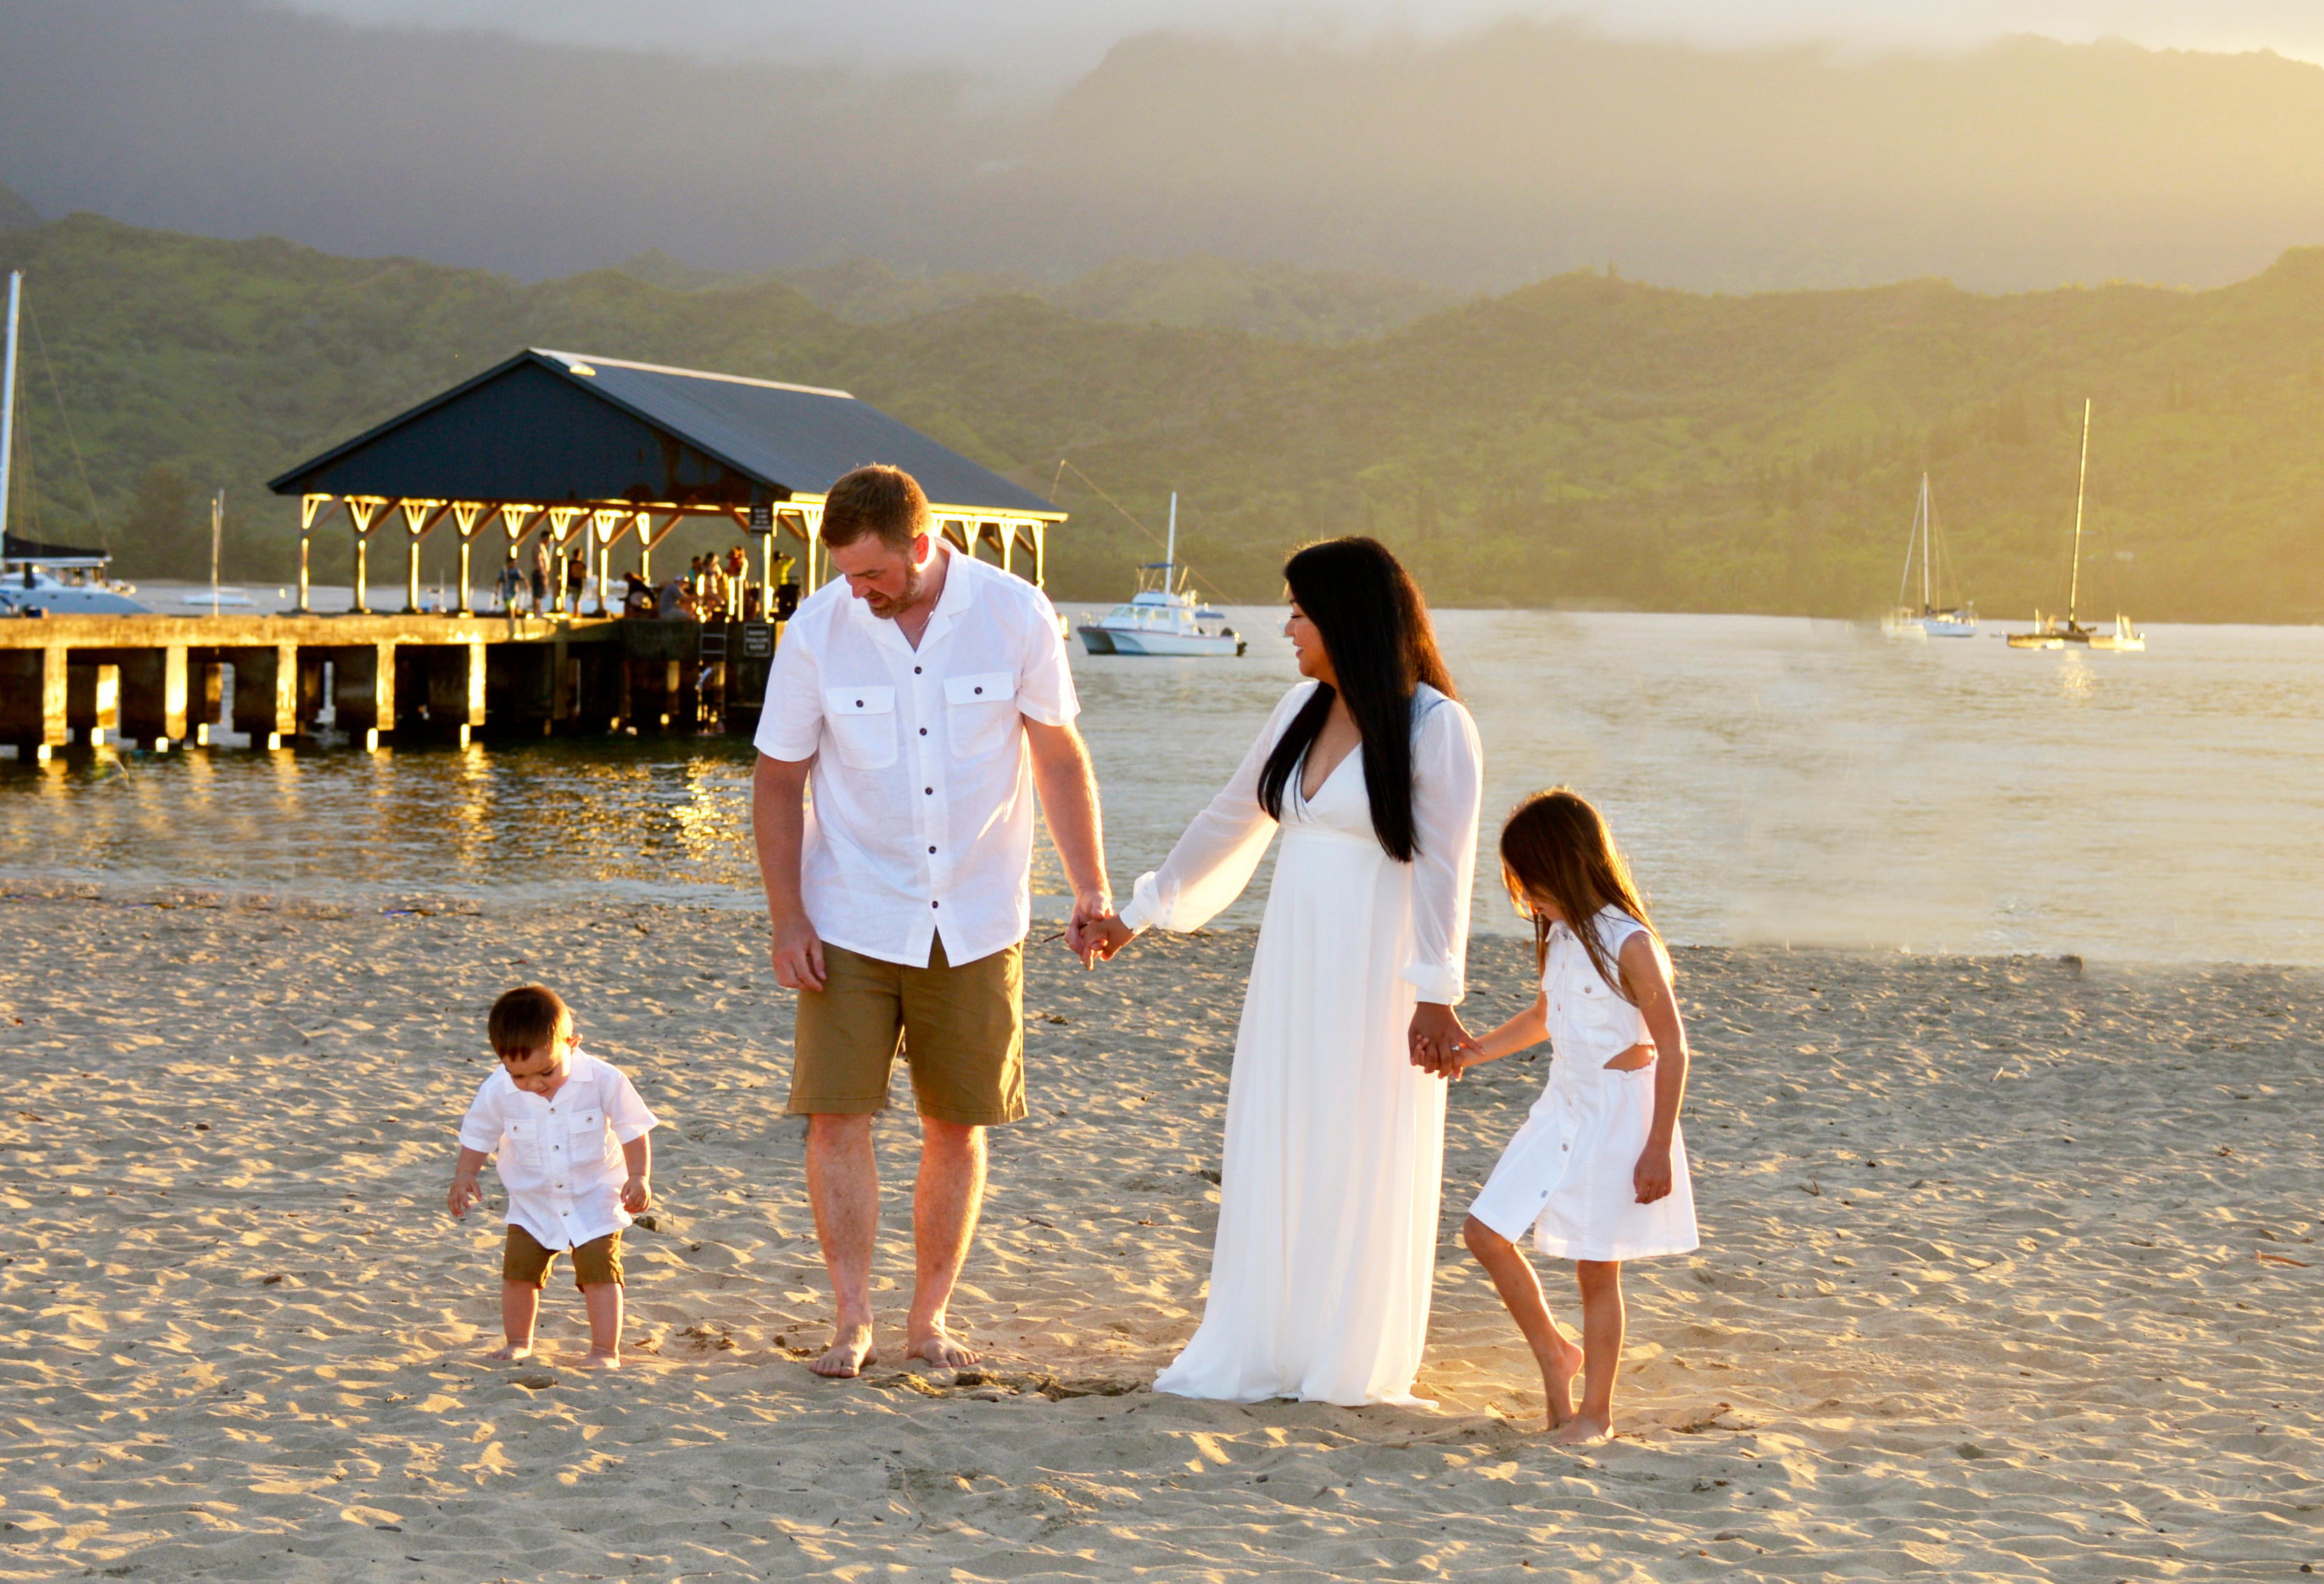 Let us preserve your family's precious moments with our family photography services. At Reflections Kauai Photography, we specialize in capturing the joy and connection that make family memories so meaningful.